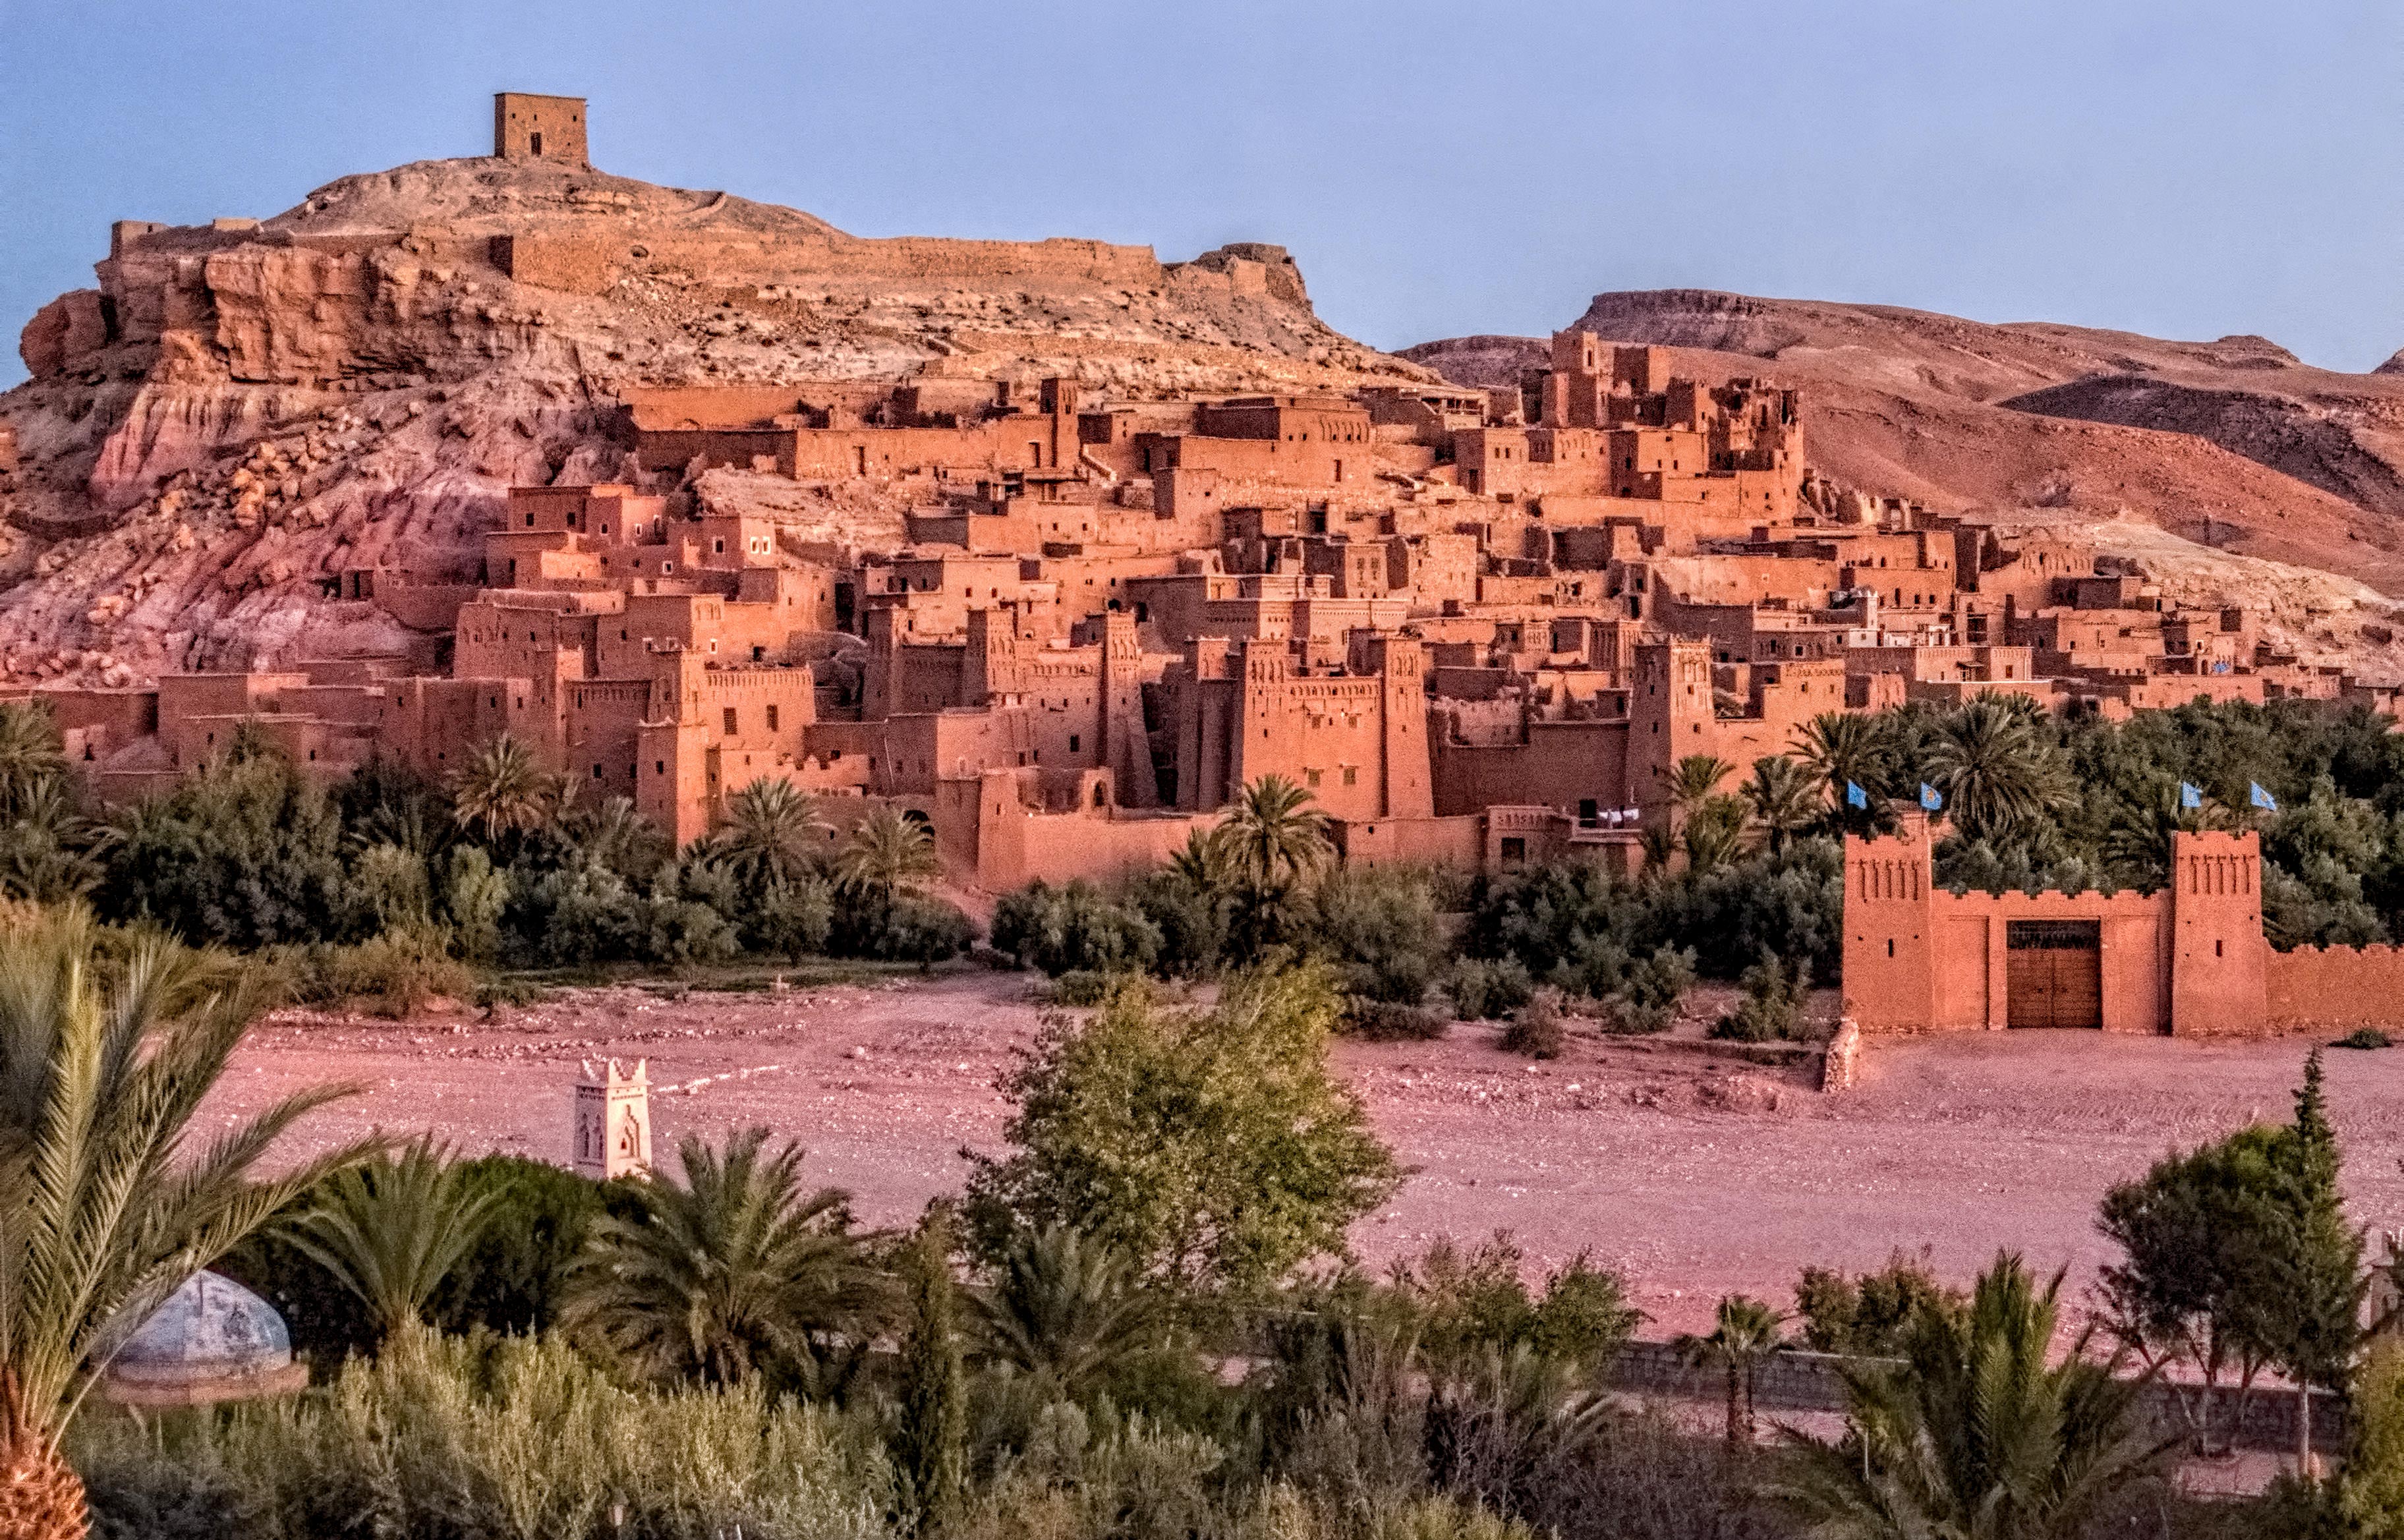 Morocco. I’ve heard way too many stories of women getting harassed there. u/Adventuresintheworld